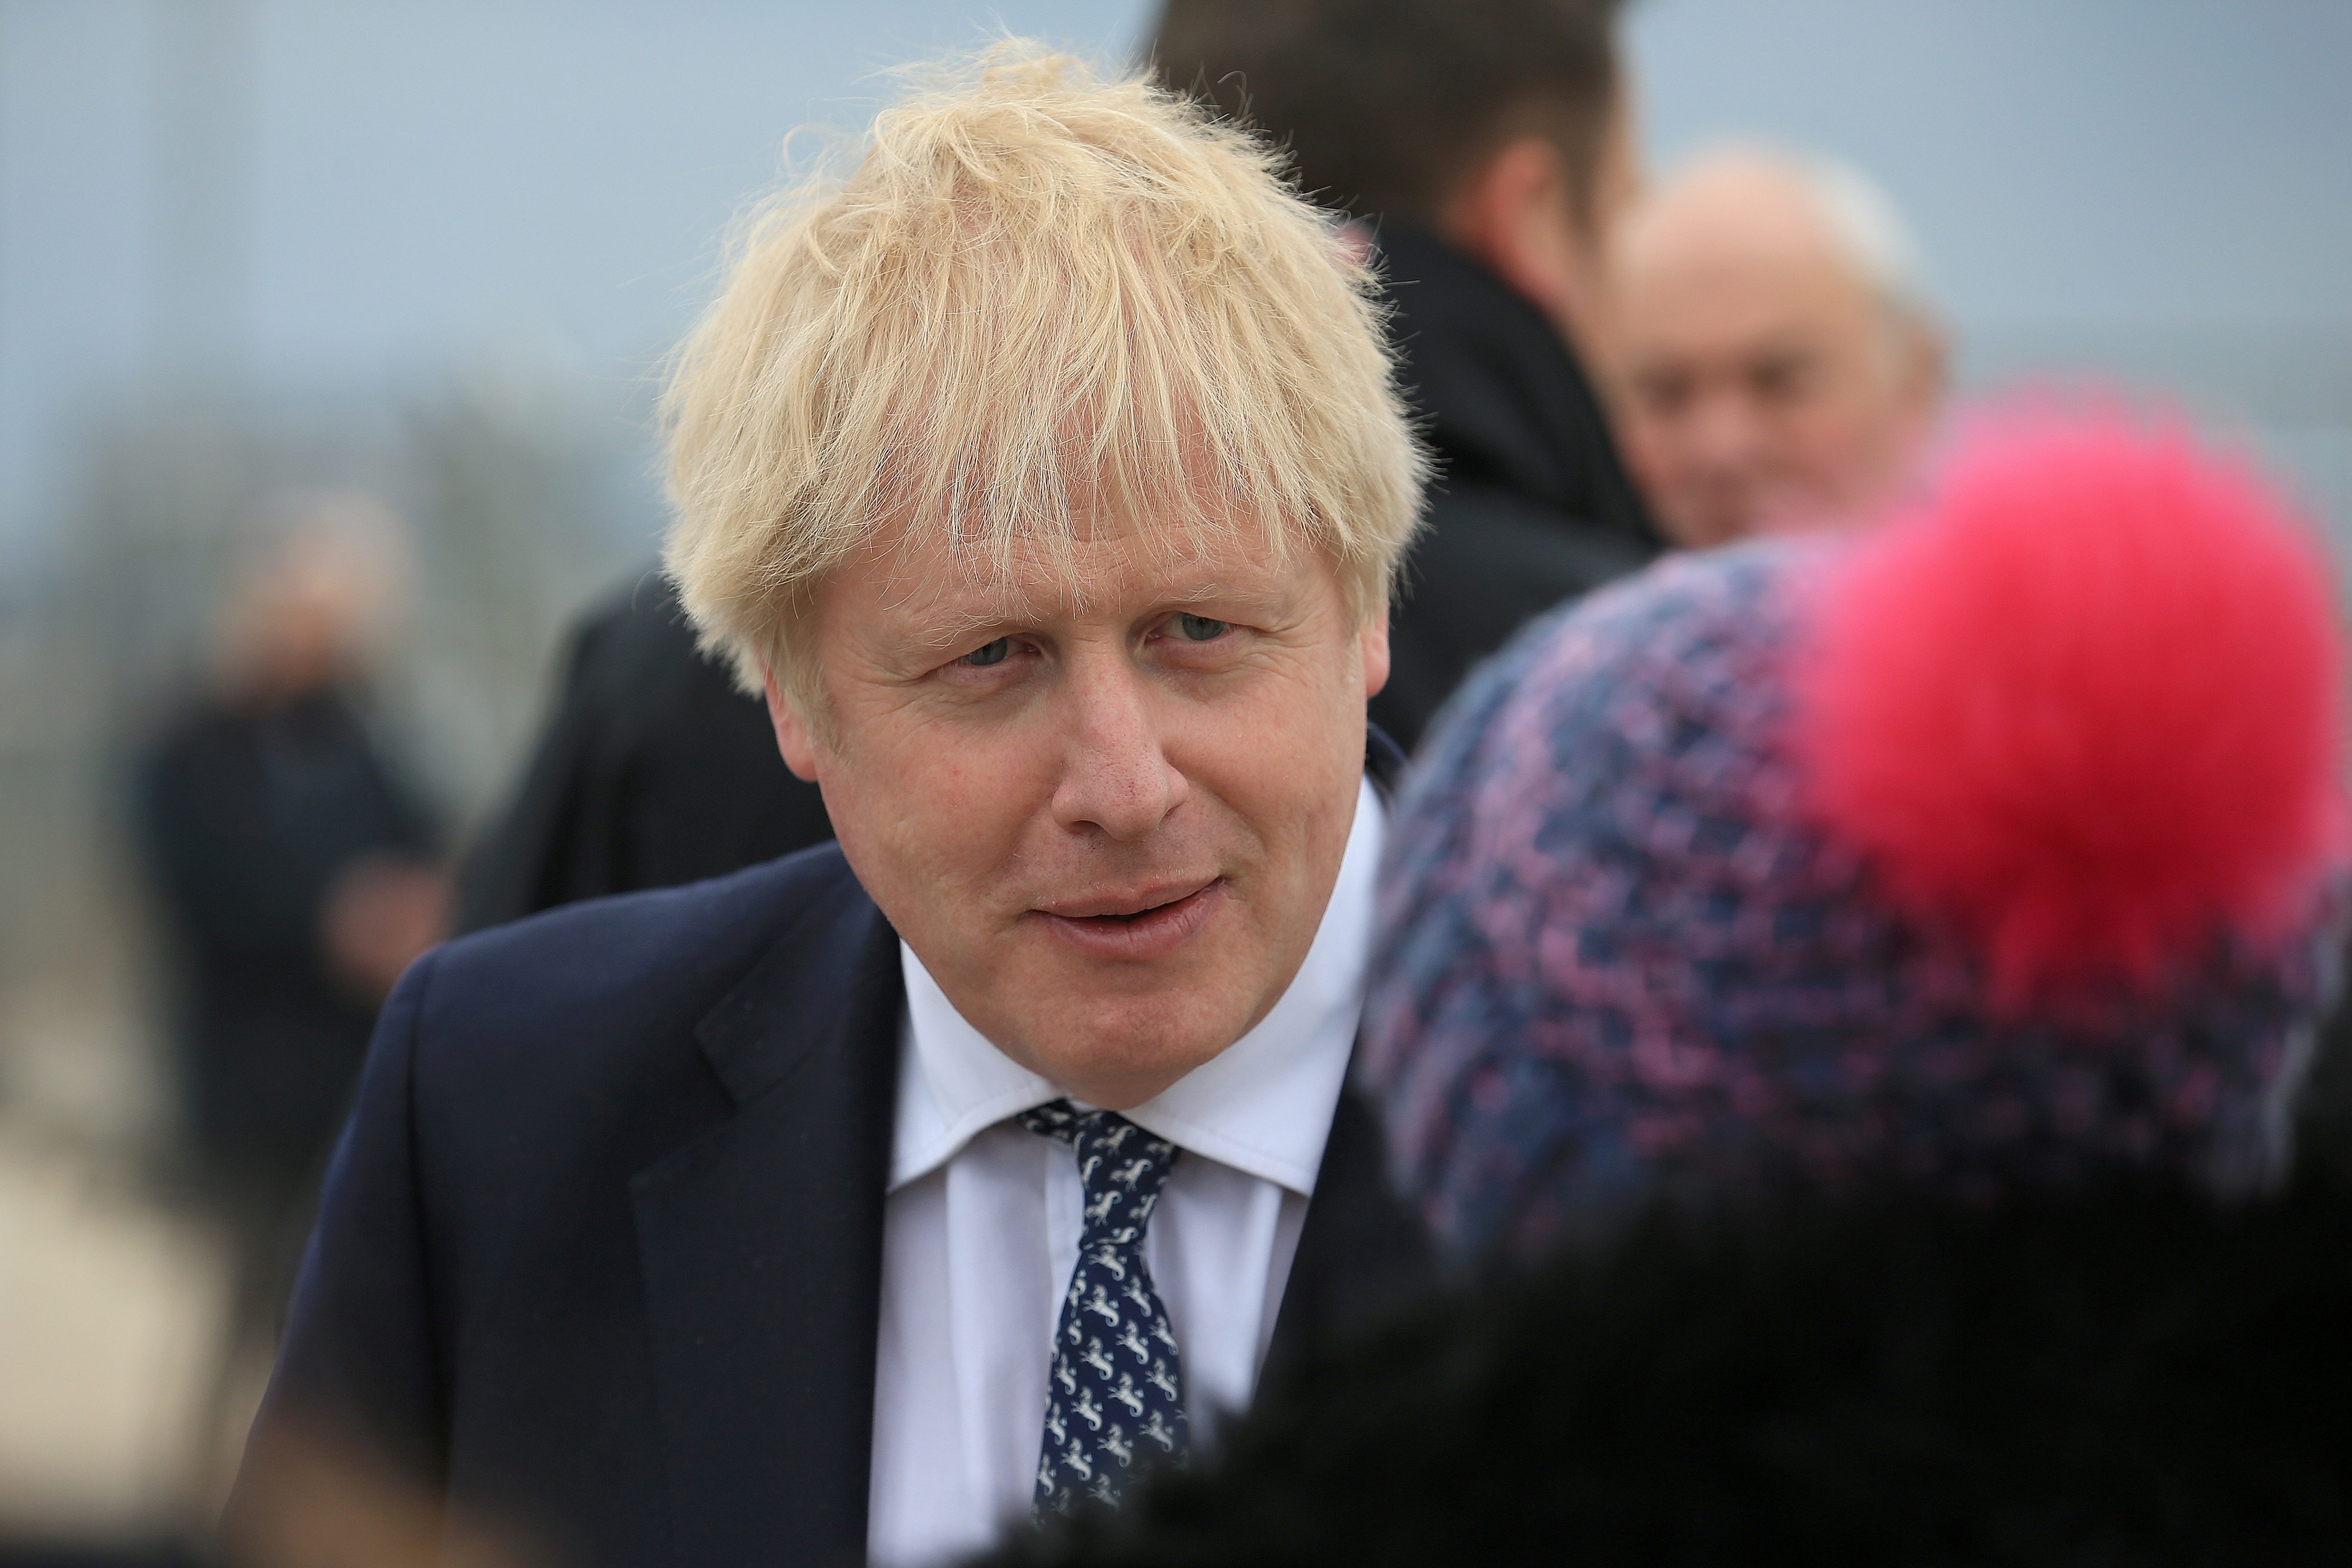 Britain's Prime Minister Boris Johnson speaks to a member of the public as he campaigns on behalf of Conservative Party candidate Jill Mortimer in Hartlepool